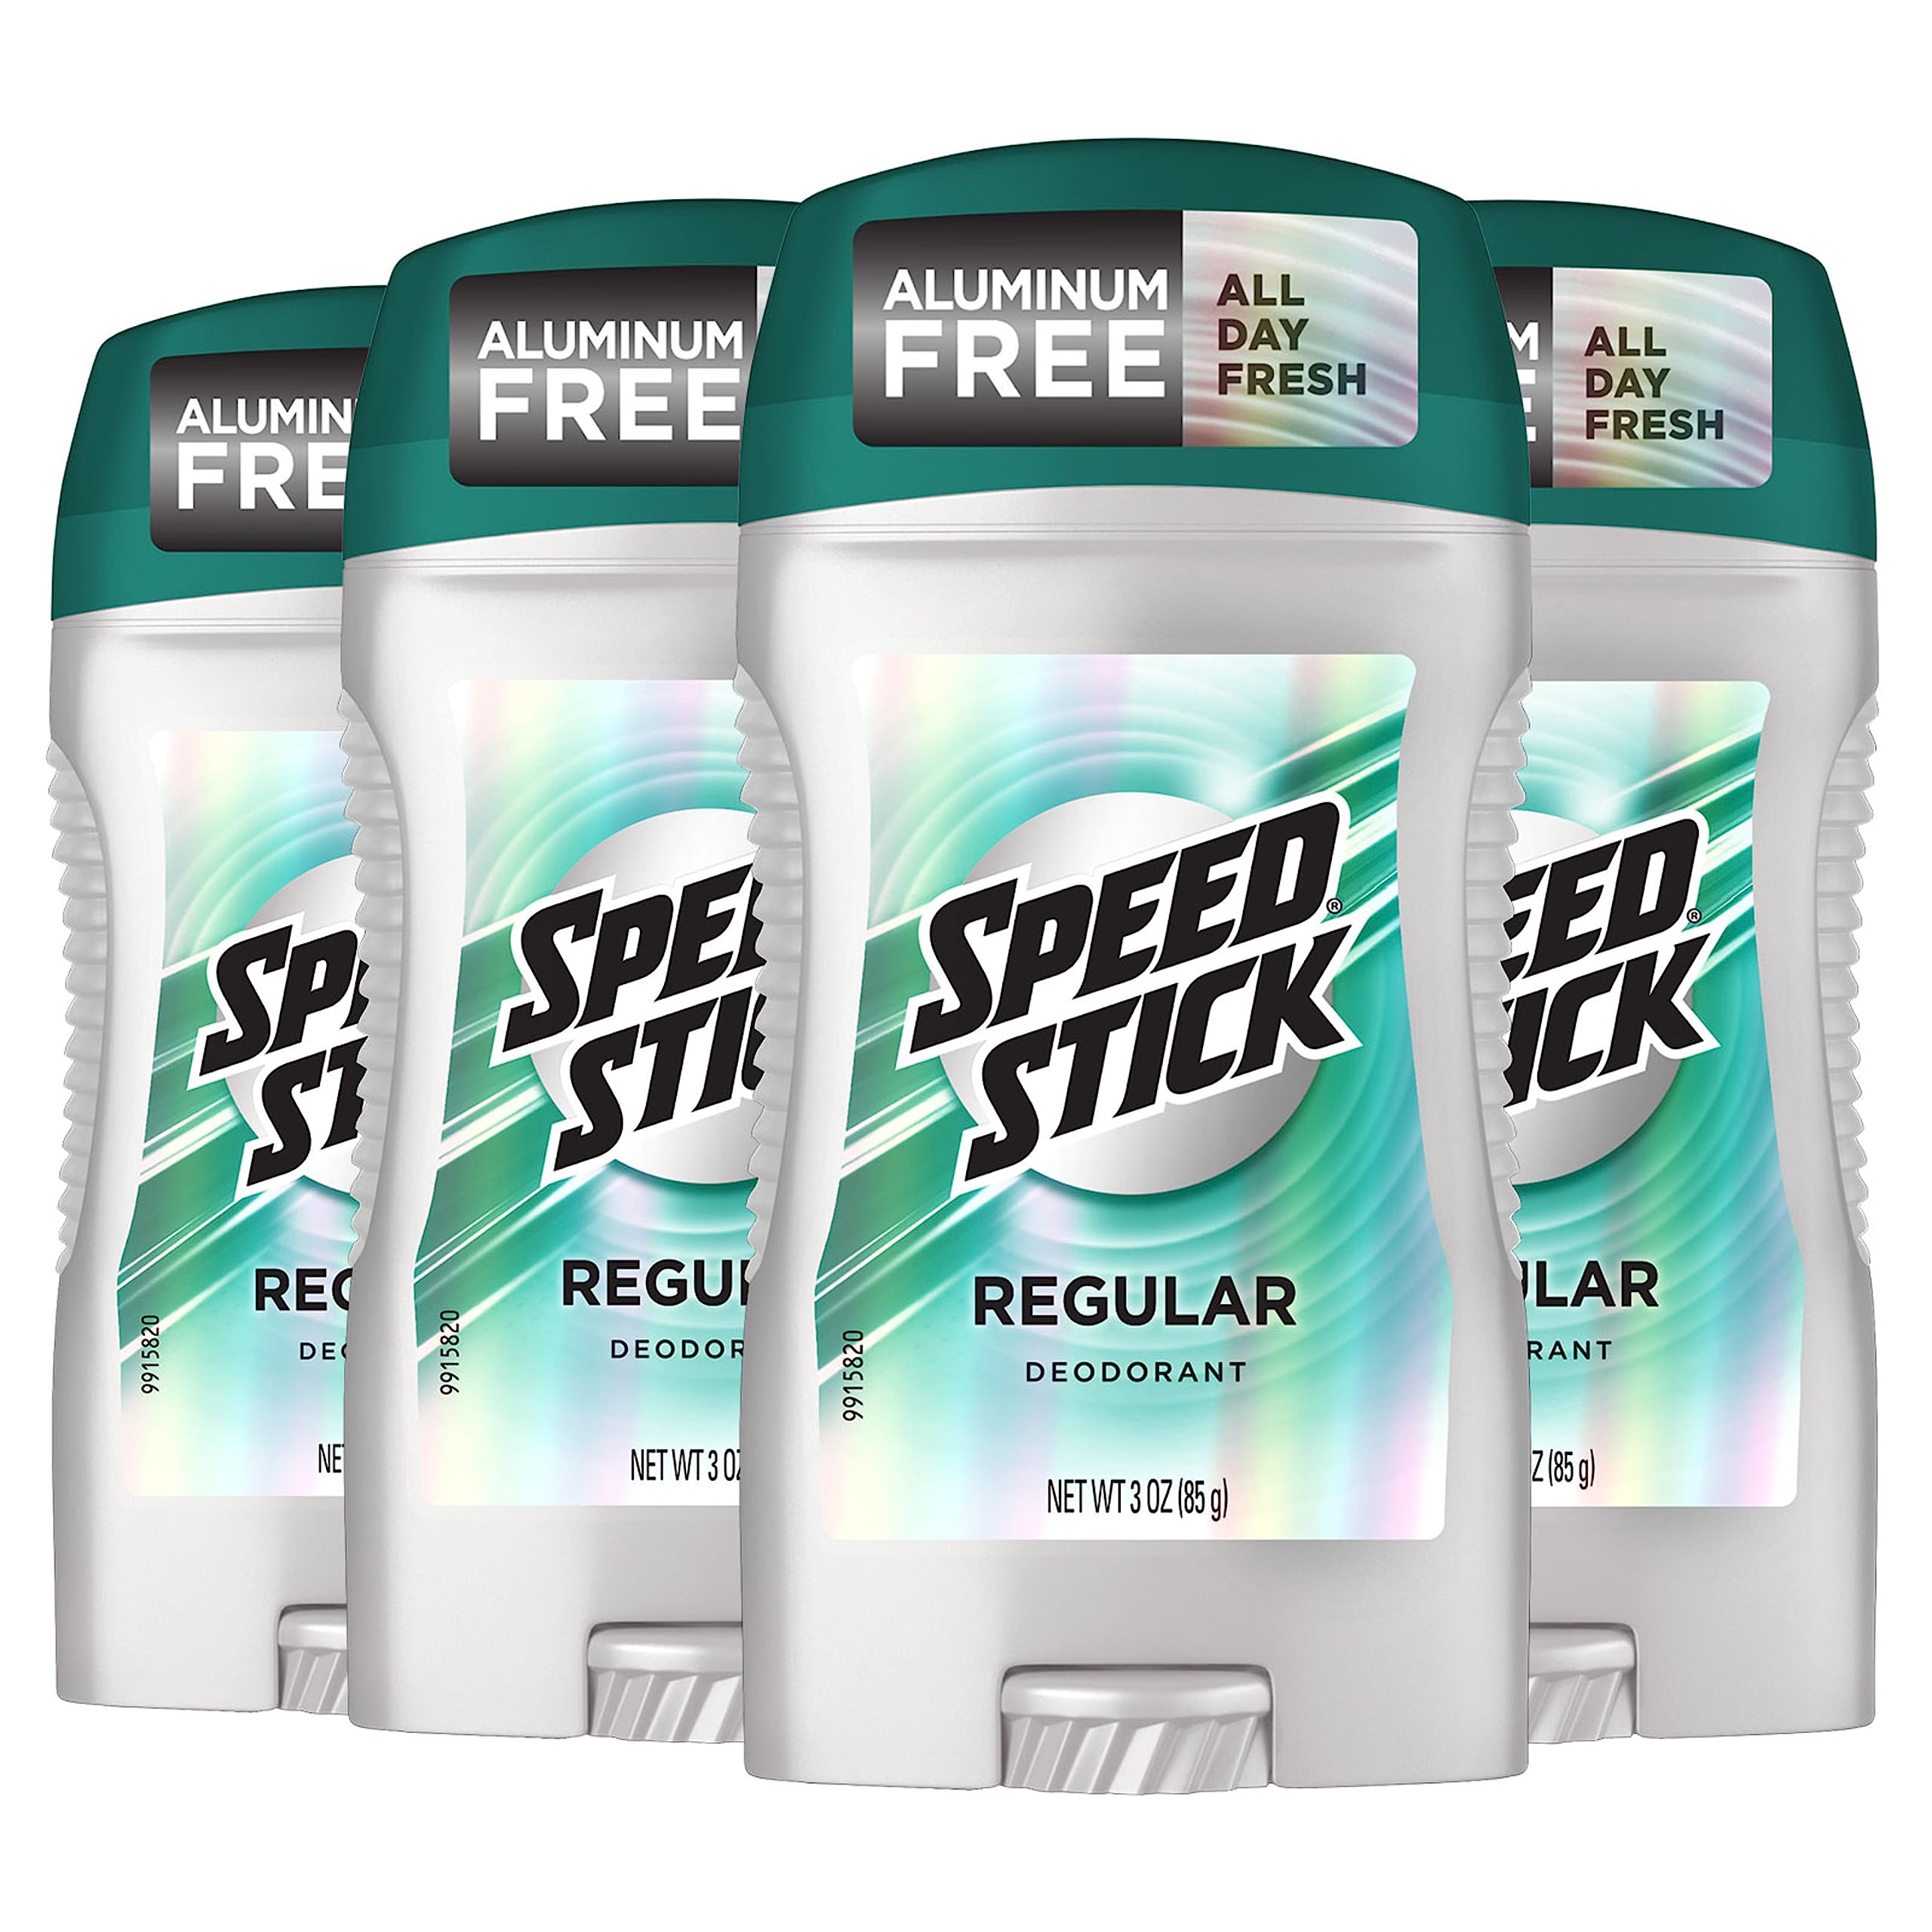 4-Pack 3-Oz Speed Stick Men's Aluminum Free Deodorant (Regular Scent) $5.65 w/ S&S + Free Shipping w/ Prime or on $25+